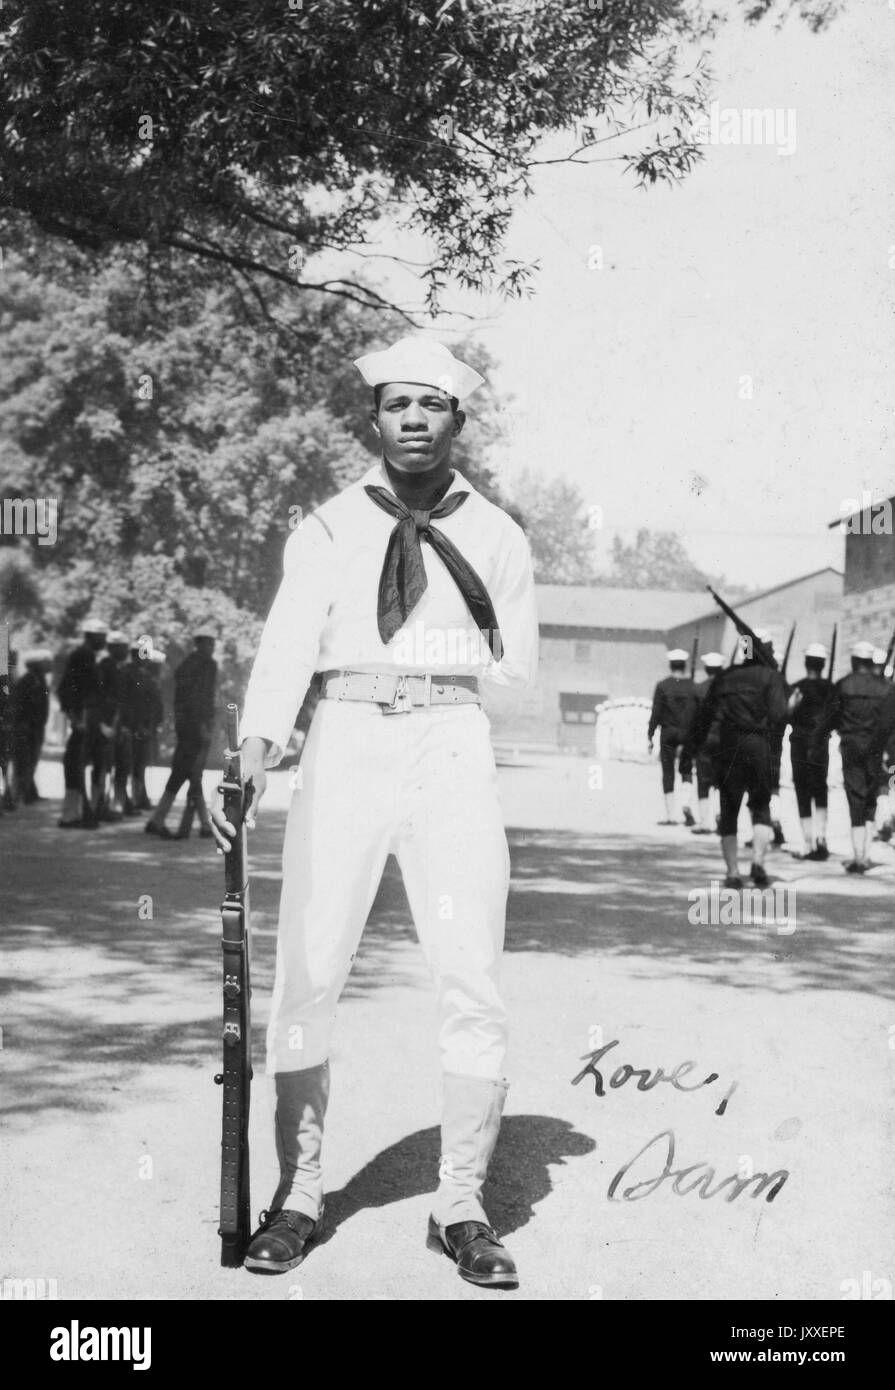 Portrait of an African American US Navy Sailor standing in front of two groups of sailors practicing in dark colored outfits, he is wearing a light colored Sailor uniform, one hand is behind his back and the other is holding up a firearm by his side, 1920. Stock Photo